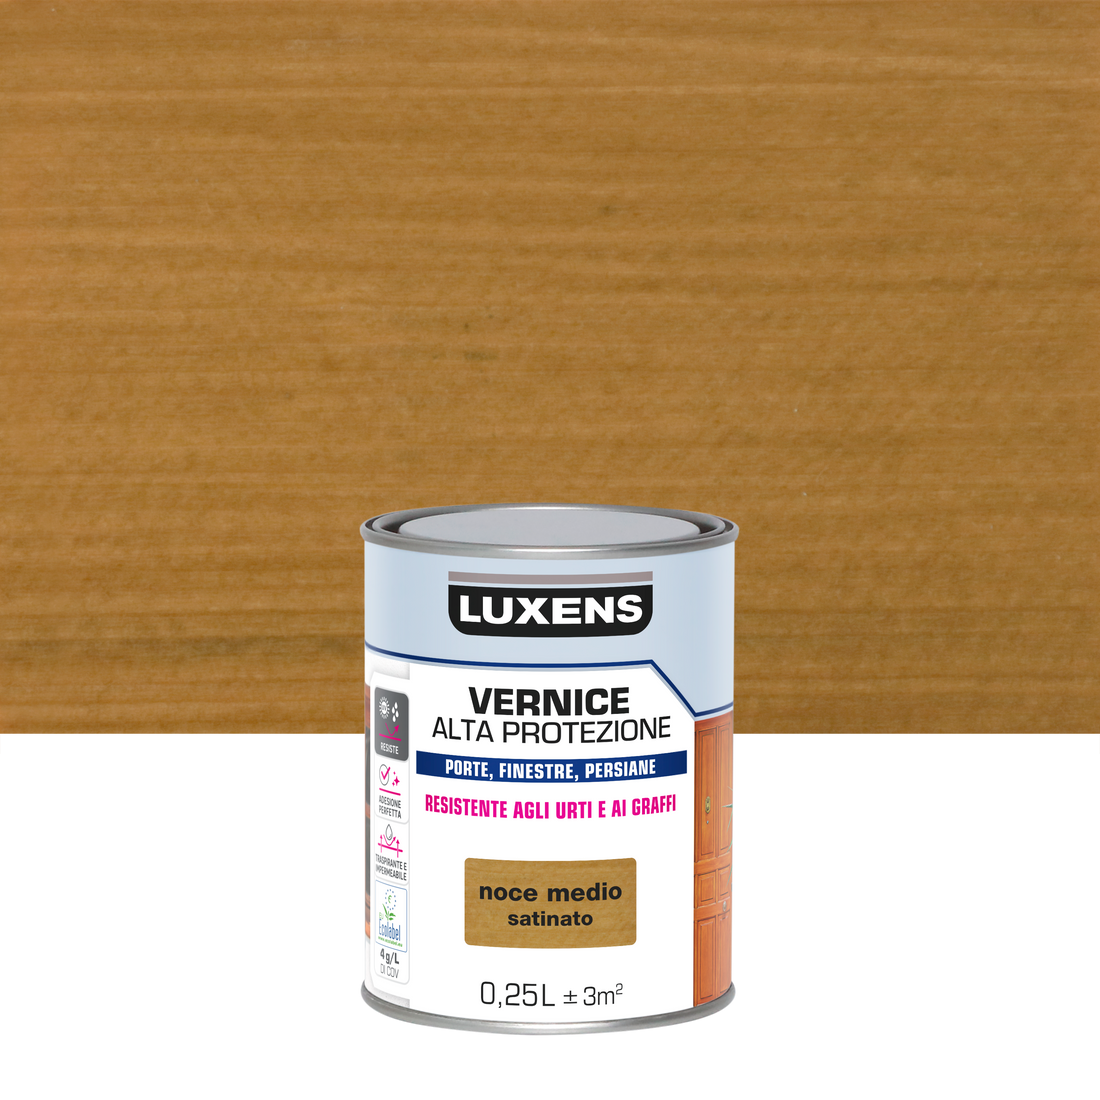 WATER-BASED WOOD PROTECTION PAINT MEDIUM SATIN WALNUT HIGH PROTECTION LUXENS 250 ML